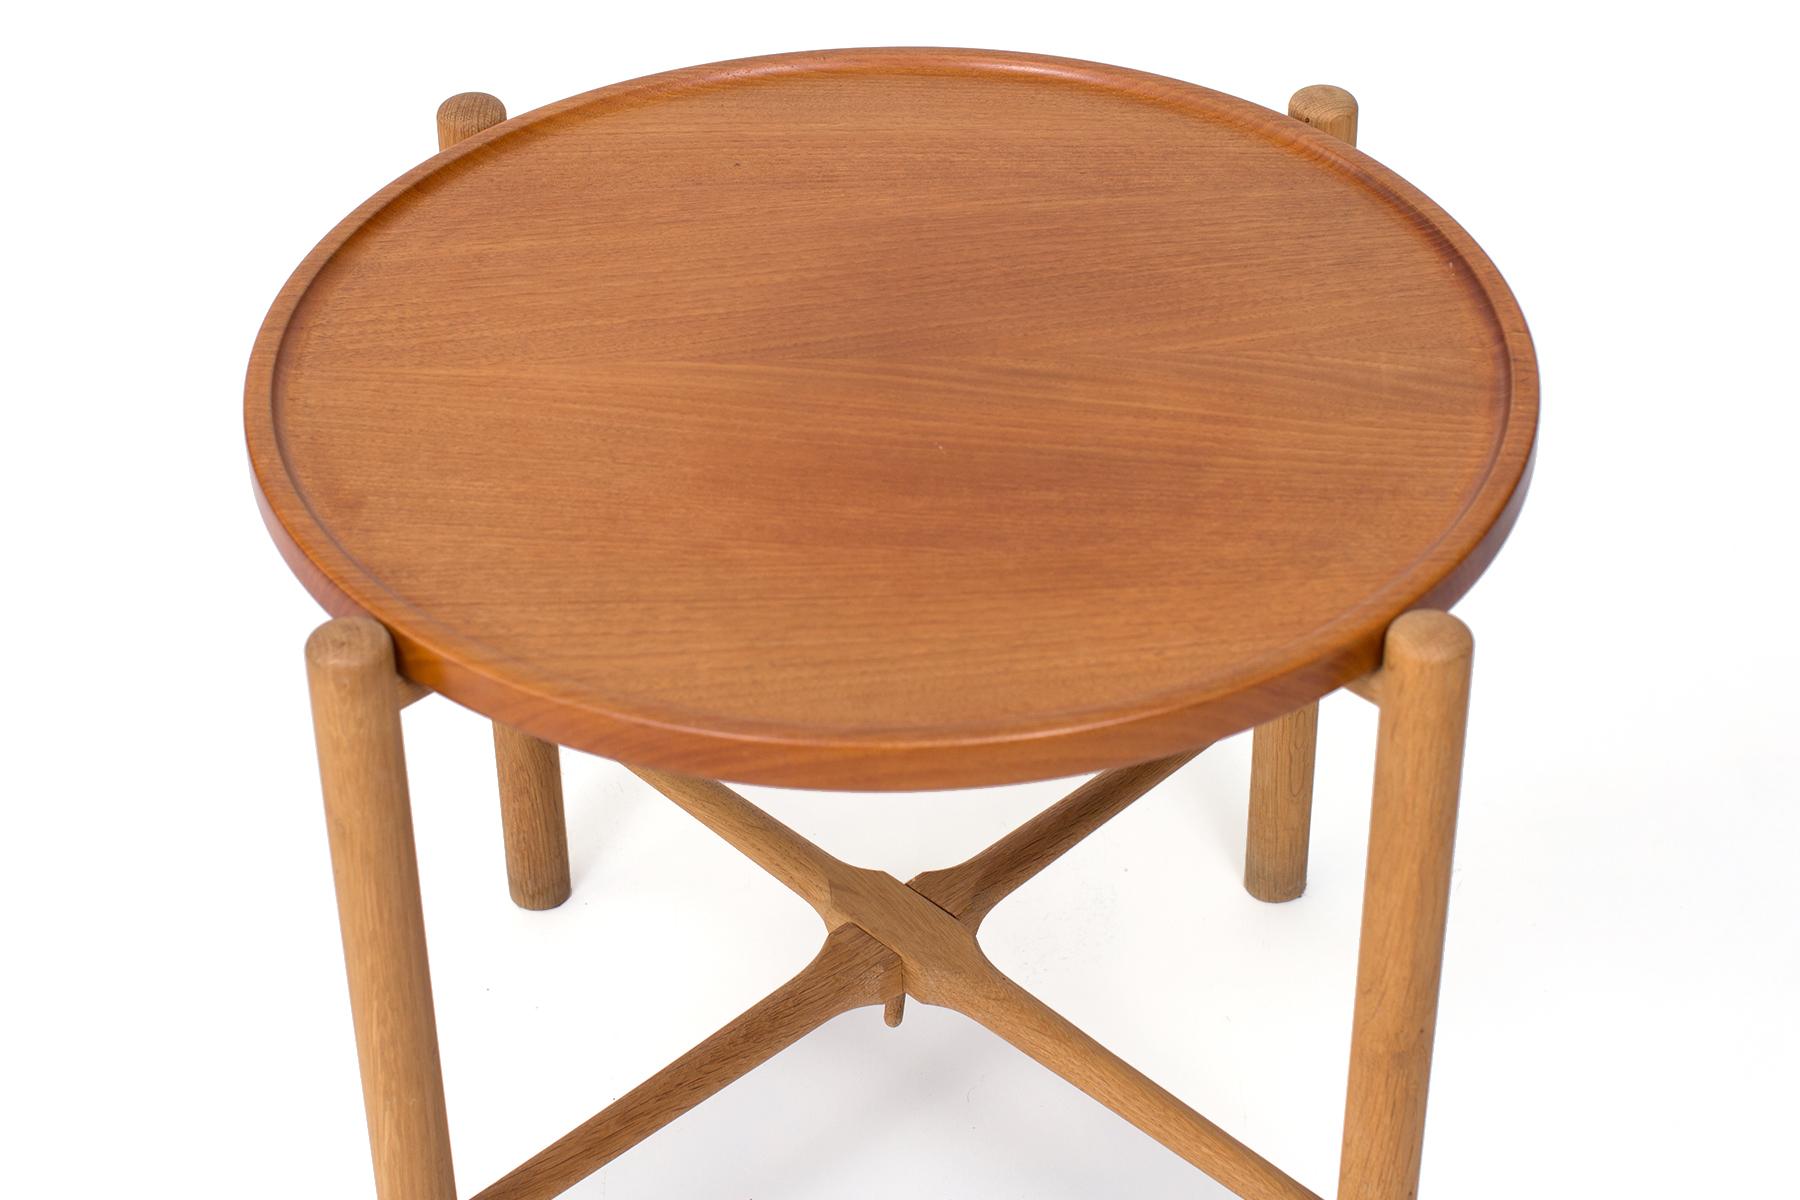 Hans Wegner for Andreas Tuck side table, circa late 1950s. This all original example has a collapsible base and removable top. It is executed in teak and beech.